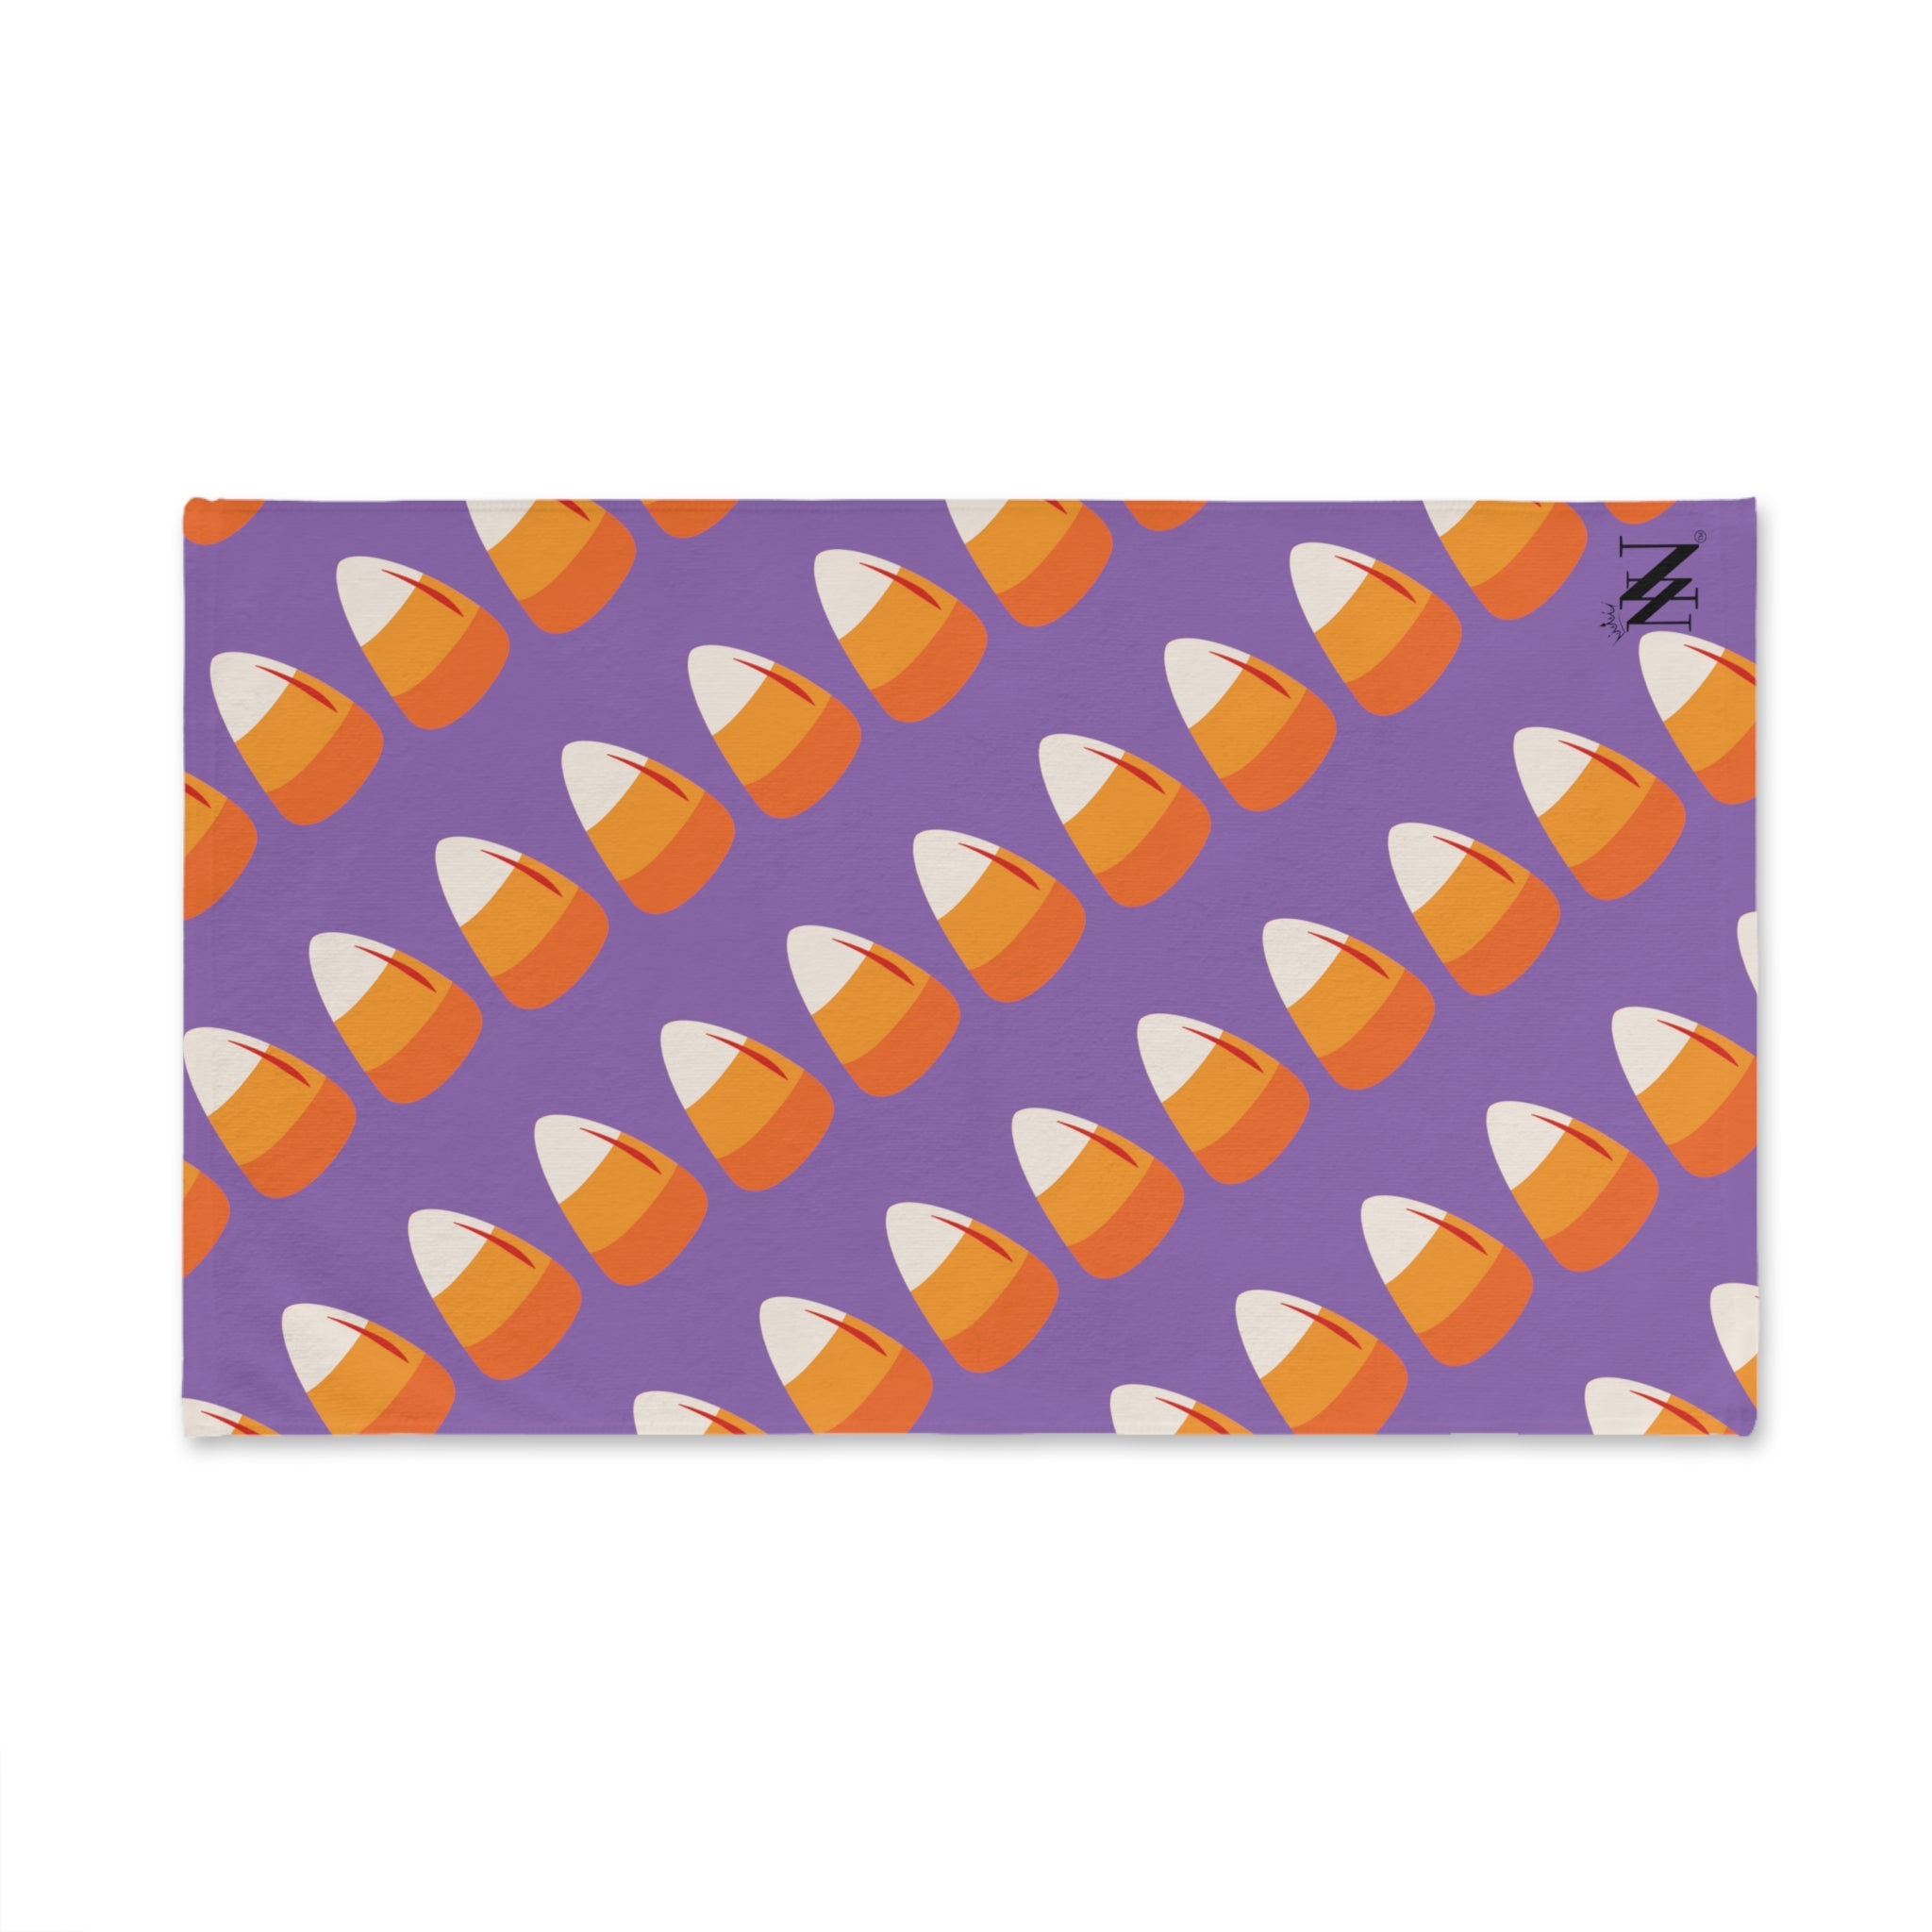 Candy Corn Lavendar | Funny Gifts for Men - Gifts for Him - Birthday Gifts for Men, Him, Husband, Boyfriend, New Couple Gifts, Fathers & Valentines Day Gifts, Hand Towels NECTAR NAPKINS